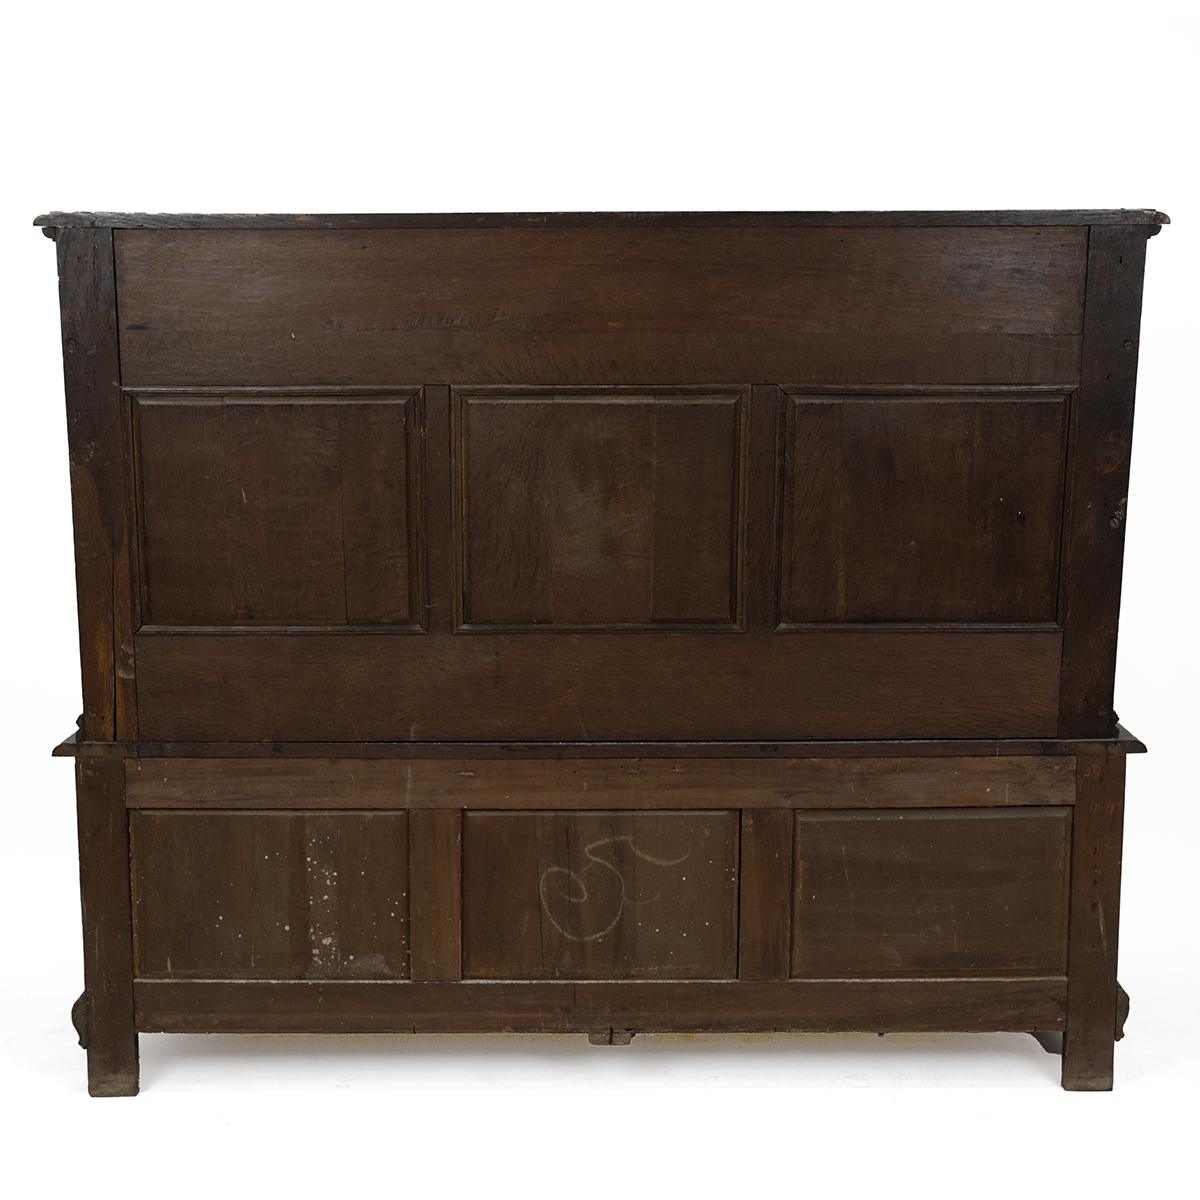 Late 19th Century Flemish oak settle, heavily carved throughout. The back with three inset fielde... - Image 7 of 7